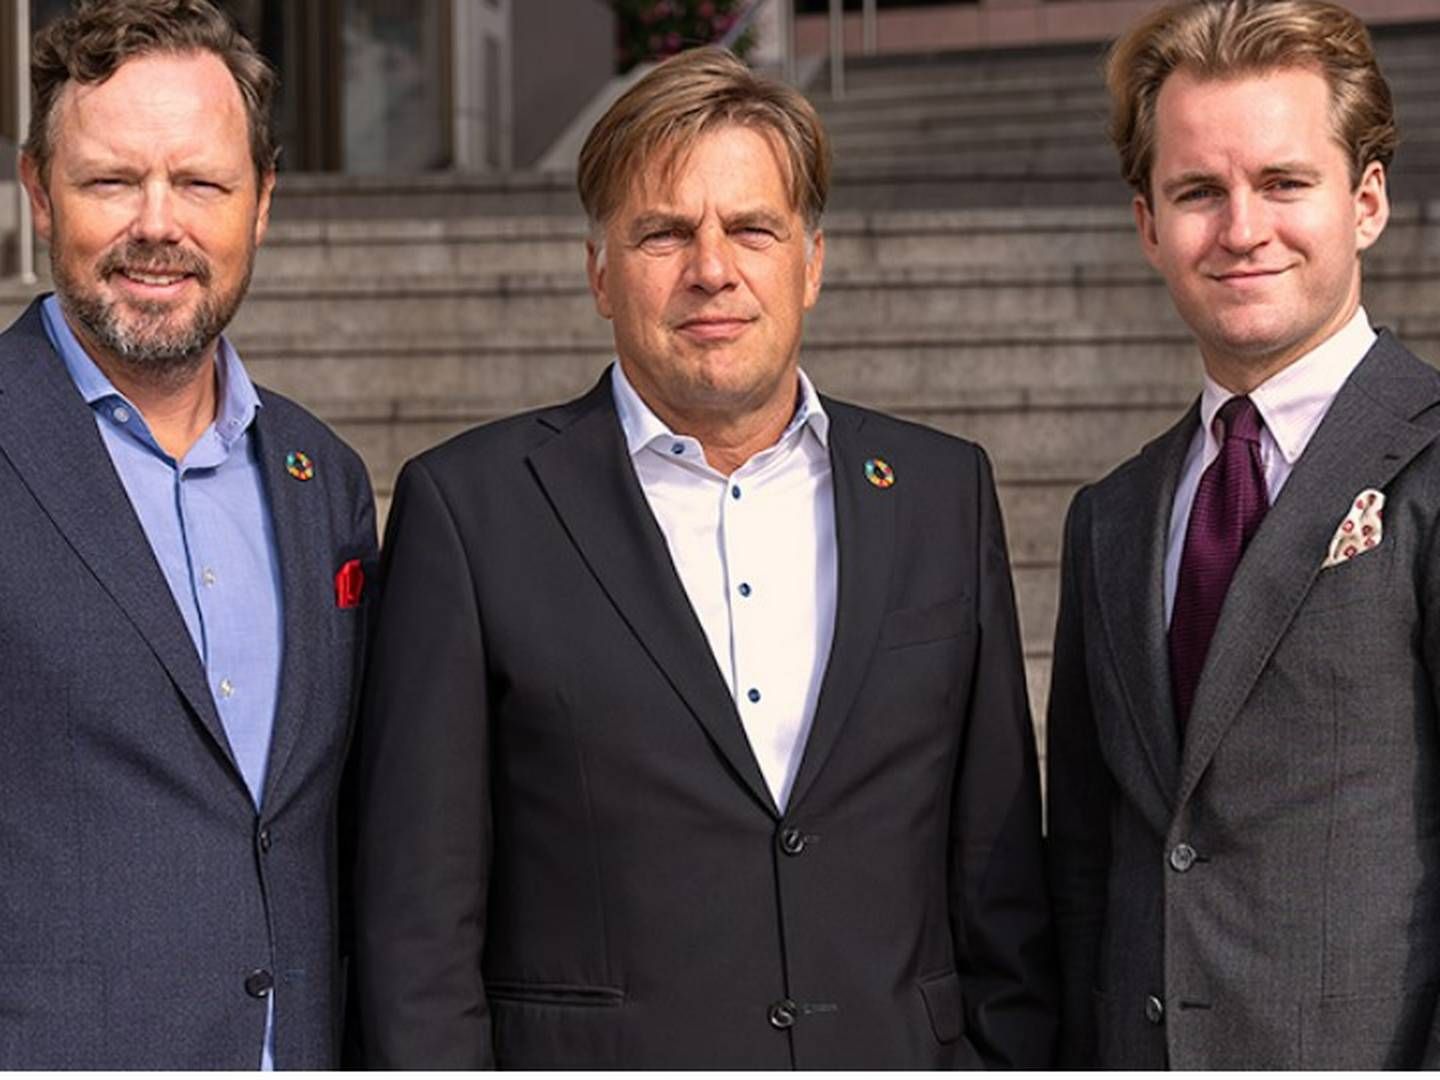 From left: The portfolio managers Joakim By, Christoffer Halldin and Simon Park who were all poached from Handelsbanken Fonder last year to take charge of Coeli's sustainable "Circulus" strategy. | Photo: PR/Coeli